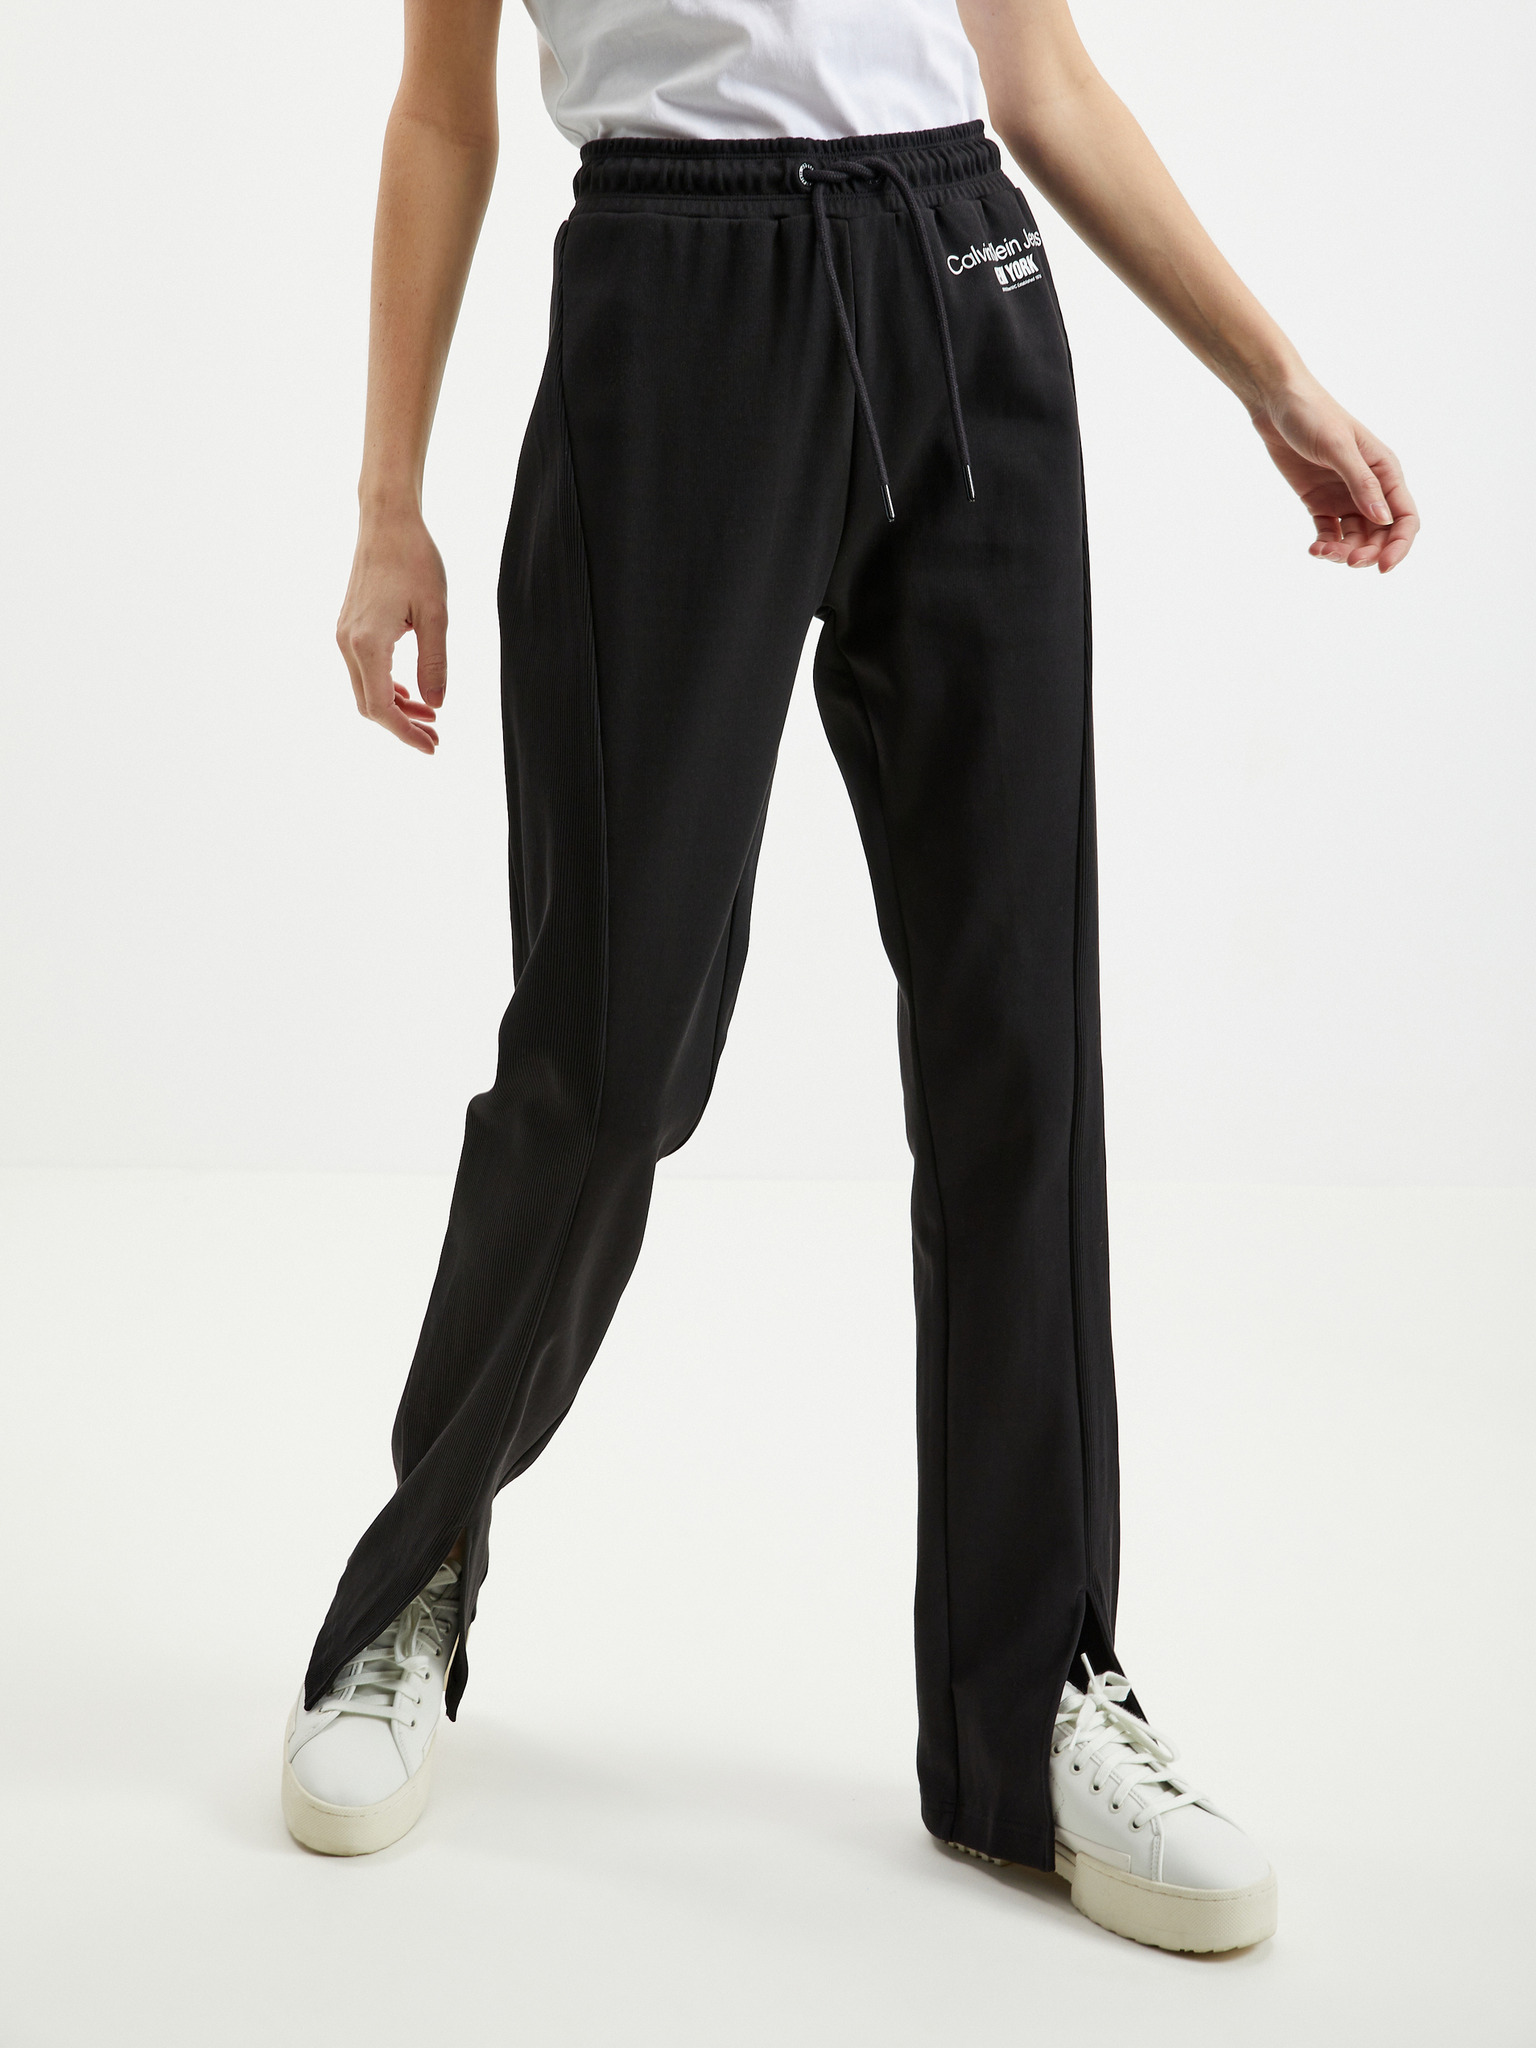 Buy PUMA Summer Squeeze T7 Cotton Regular Fit Women's Track Pants |  Shoppers Stop